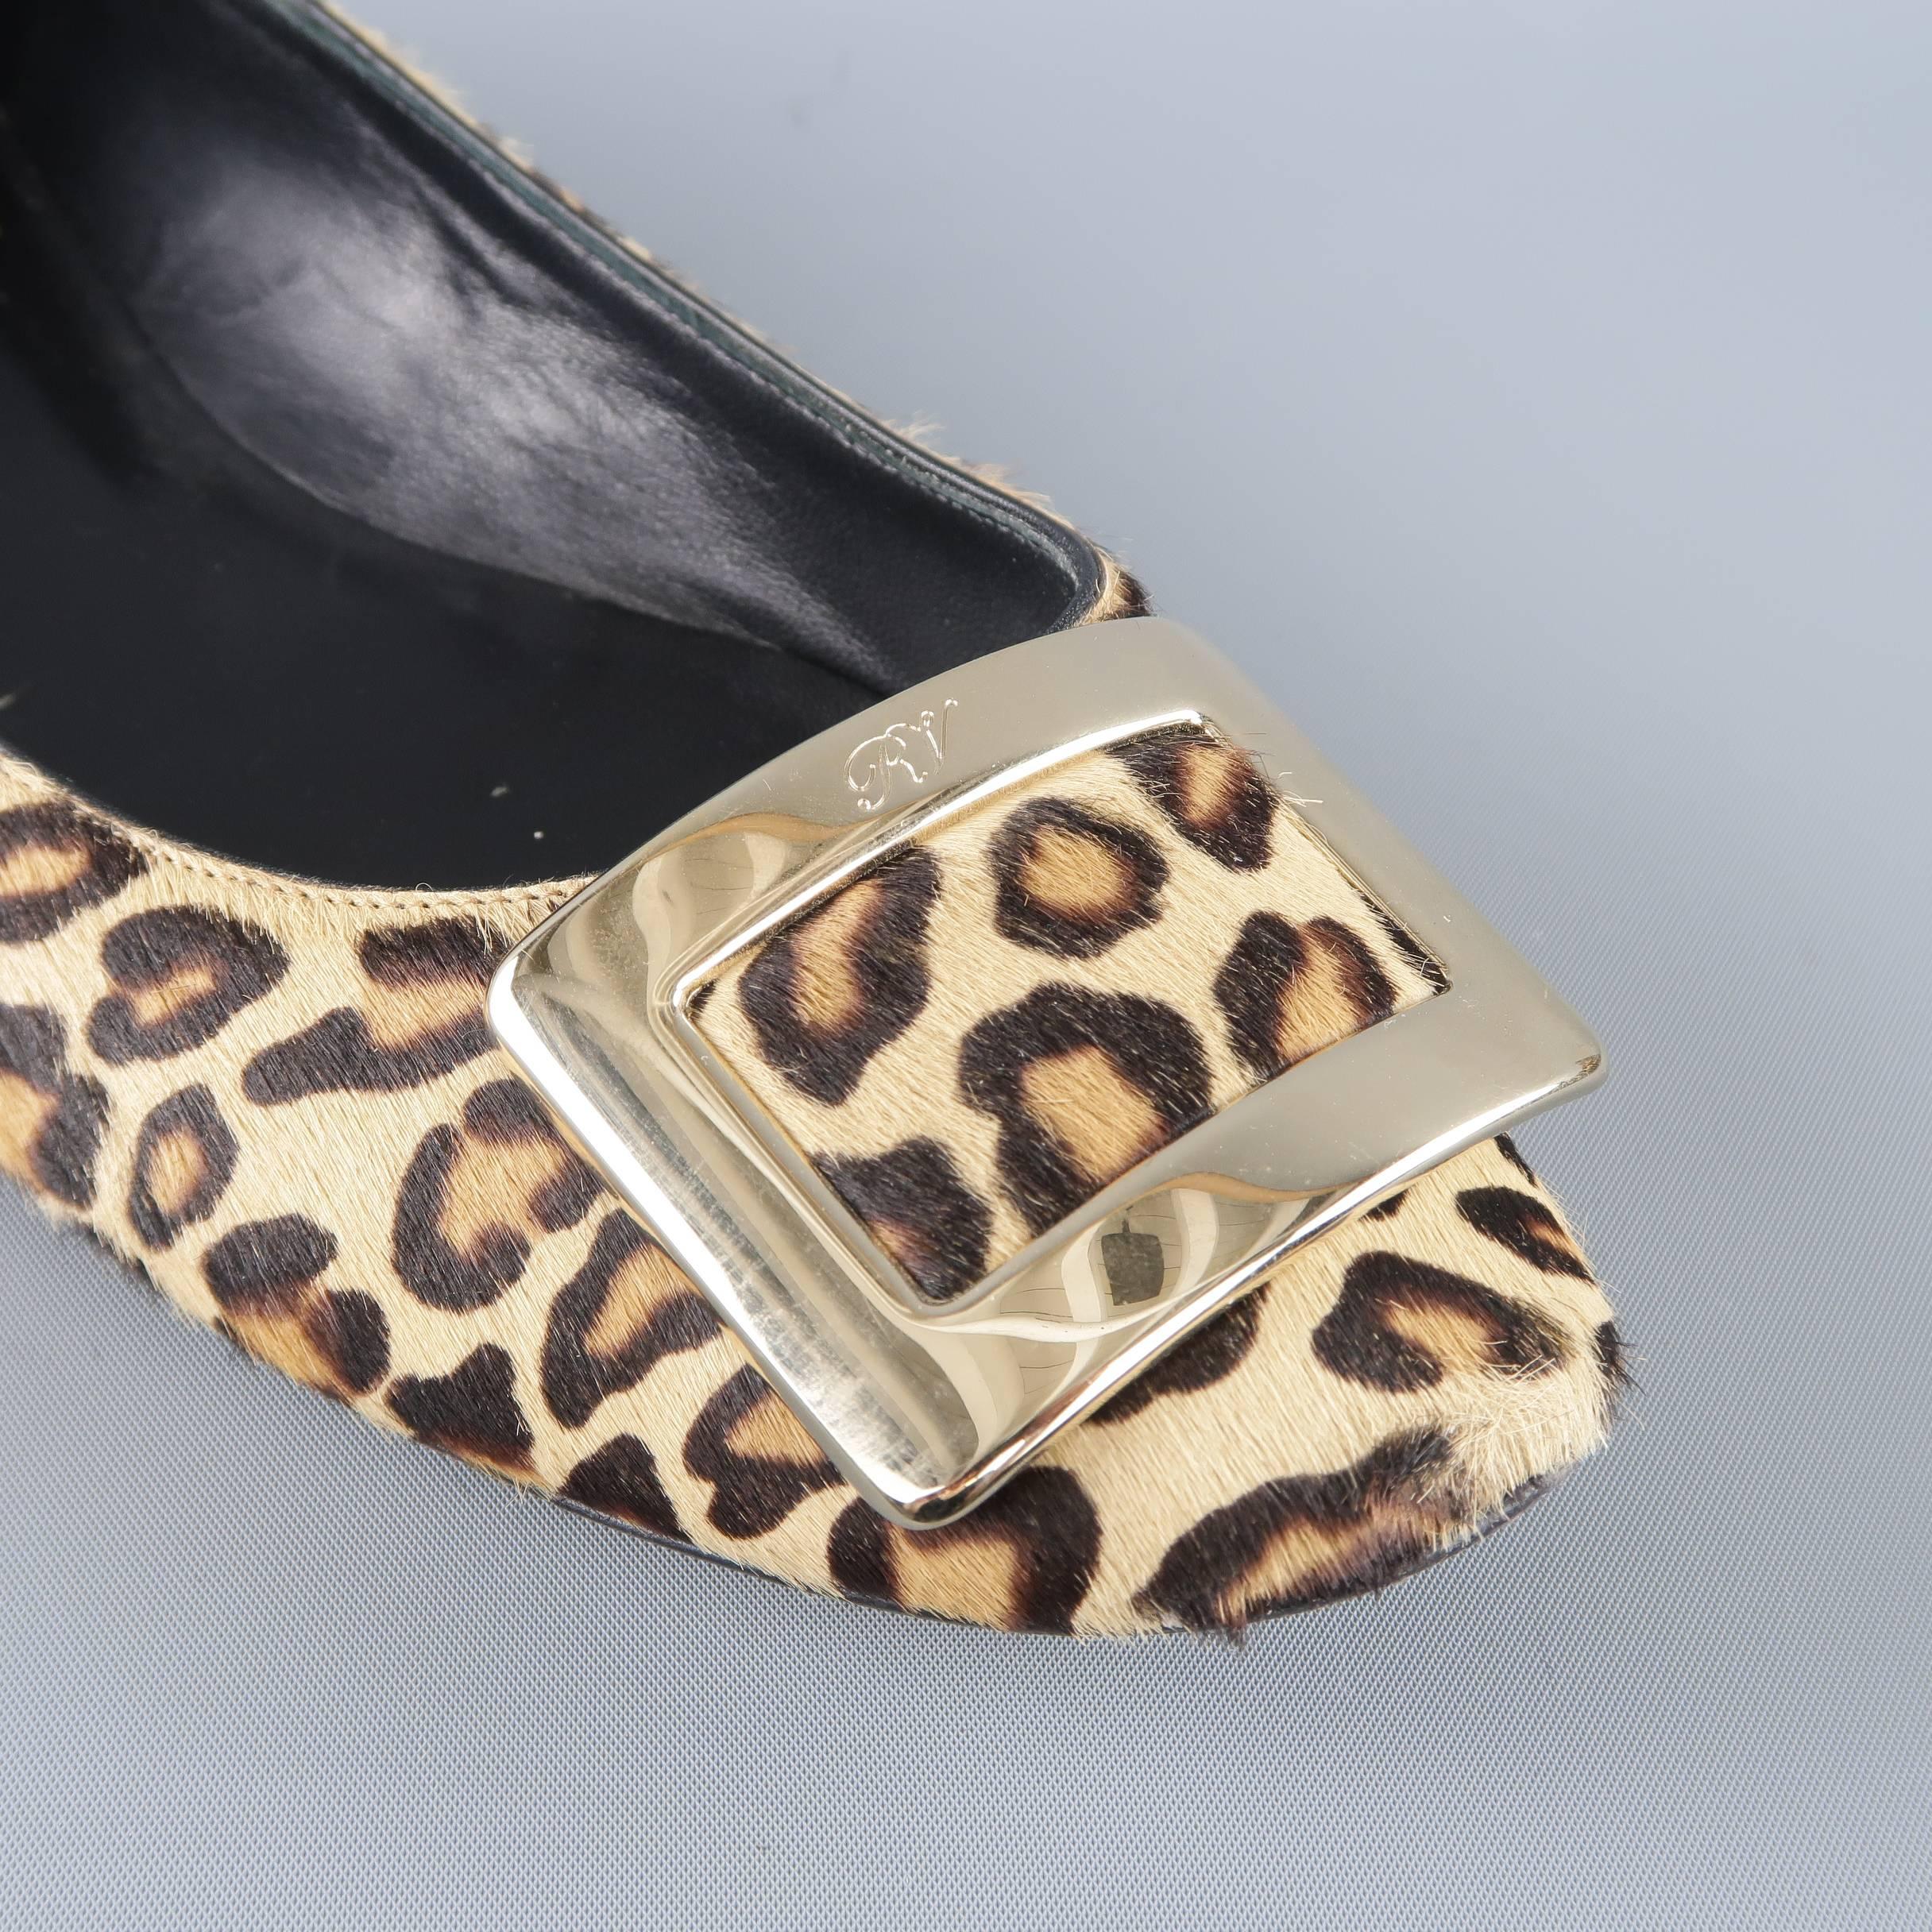 ROGER VIVIER flats come in beige and tan cheetah leopard print ponyhair leather and feature large gold tone signature embossed buckle. Made in Italy.
 
Good Pre-Owned Condition.
Marked: IT 38.5
 
Outsole: 10.5 x 3 in.


SKU: 85333